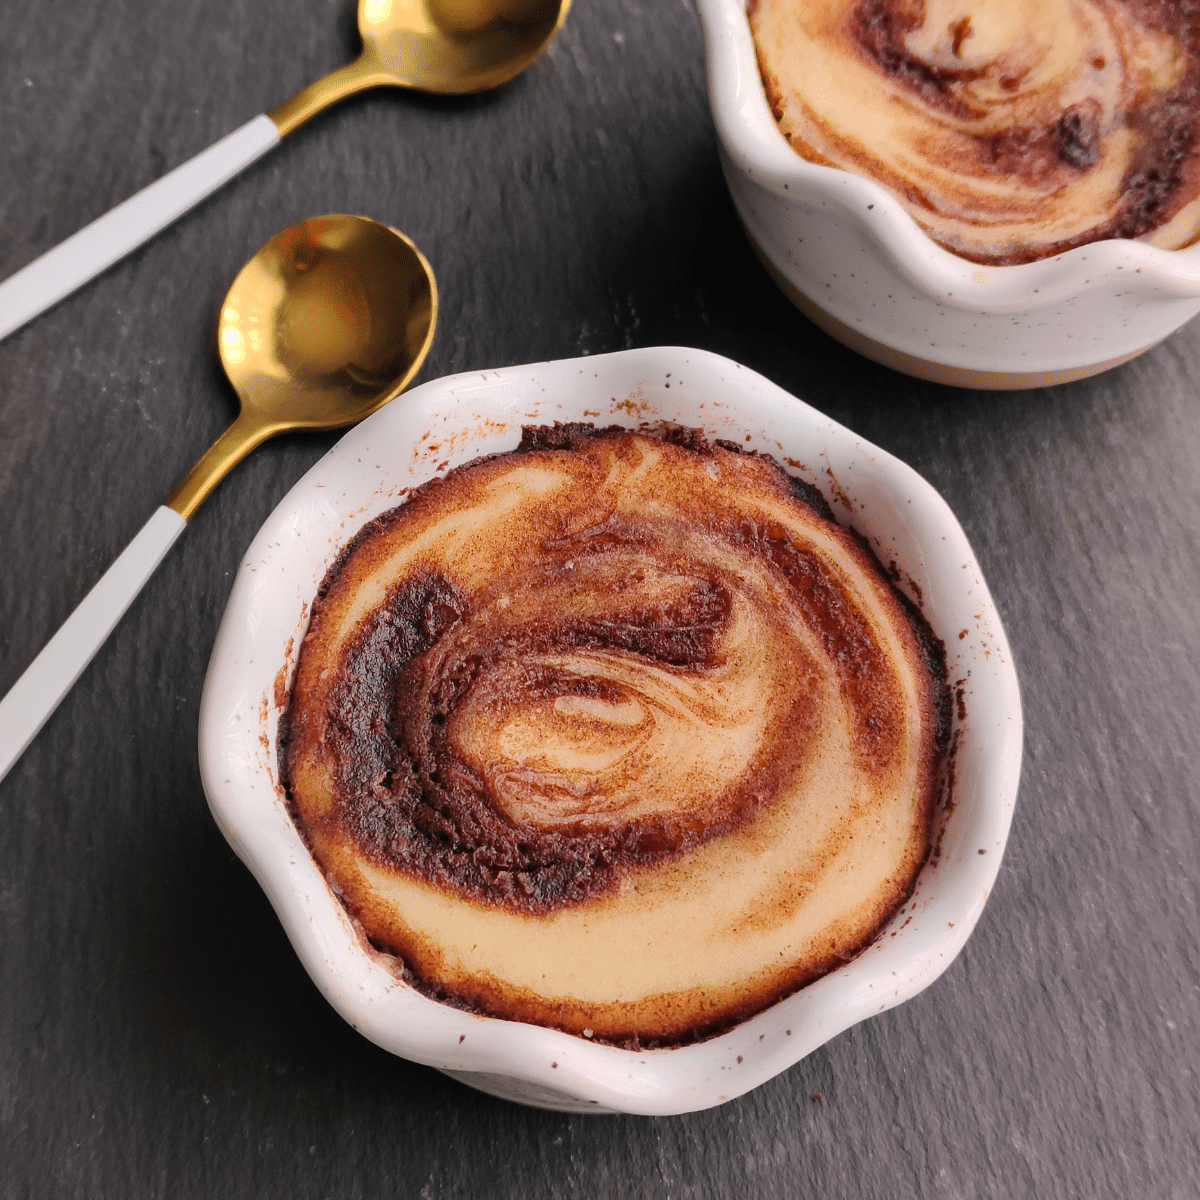 Looking for a quick, easy sweet treat in an individual serving? Enjoy this deliciously soft and fluffy Microwave Cinnamon Swirl Cake in just under 10 minutes. 